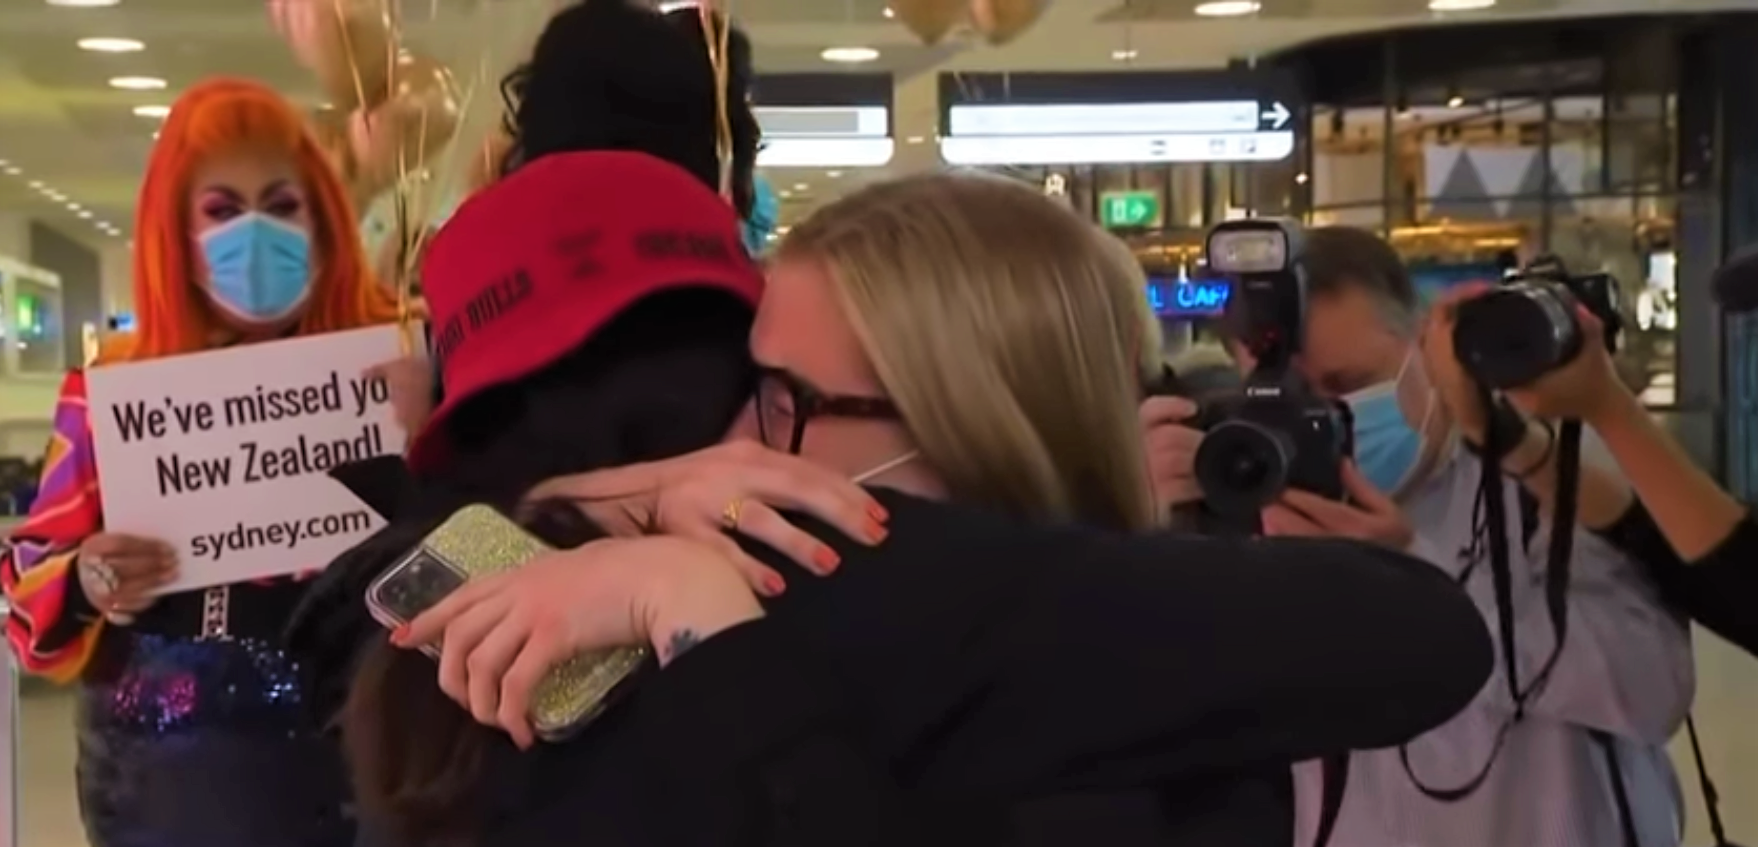 The Moment That was  !  There  were  tears  of  Joy  All  around  as  trans - Tasman  bubble  allowed  Kiwis  and  Australians  meet their Loved ones  after 400 days ! 